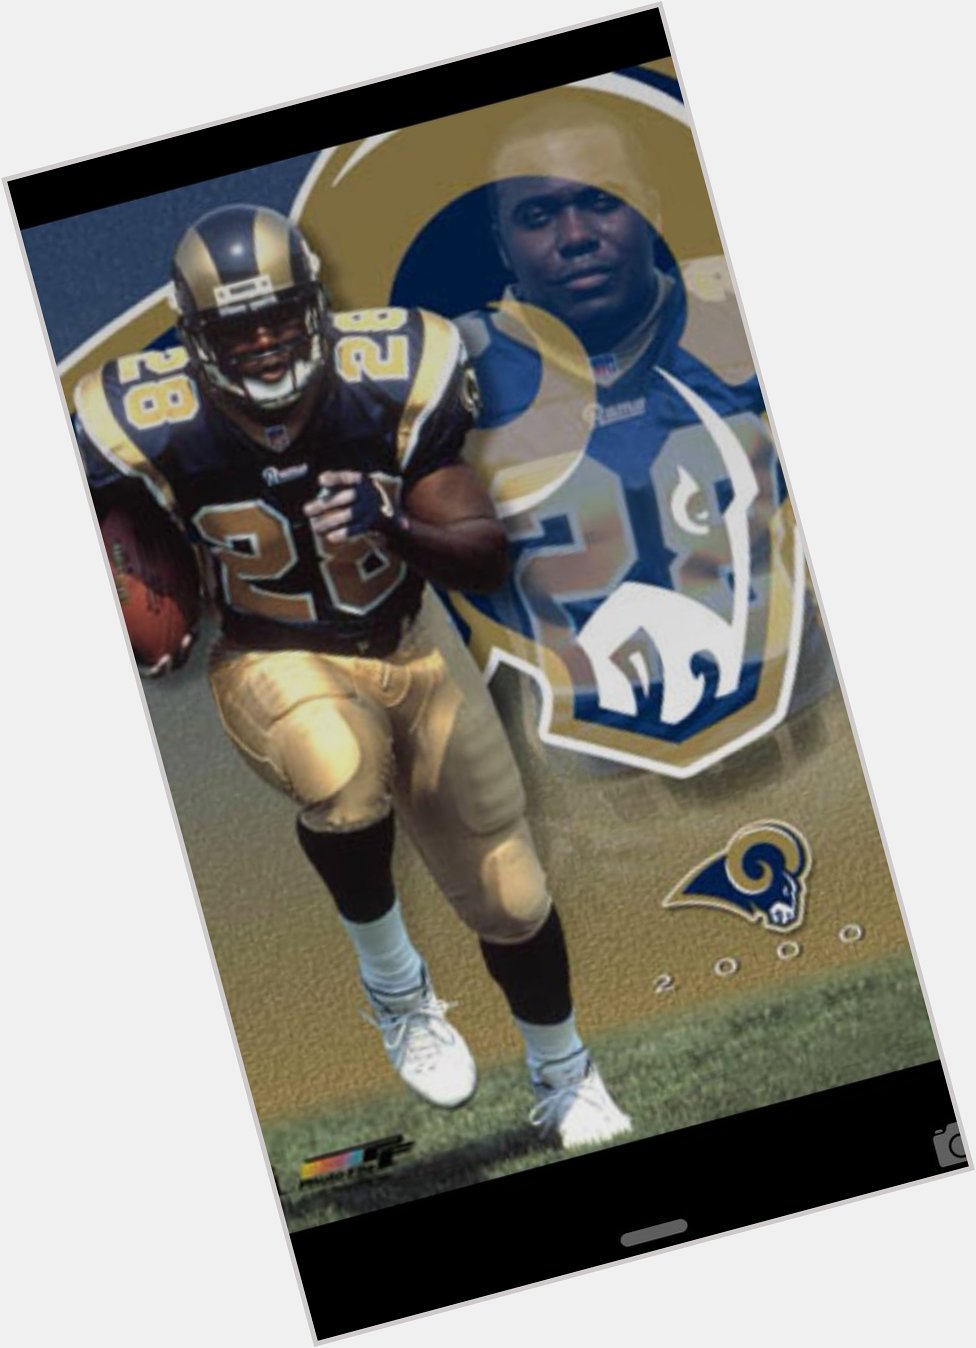 Happy Birthday to the G.O.A.T Marshall Faulk   Best EVER!!! 